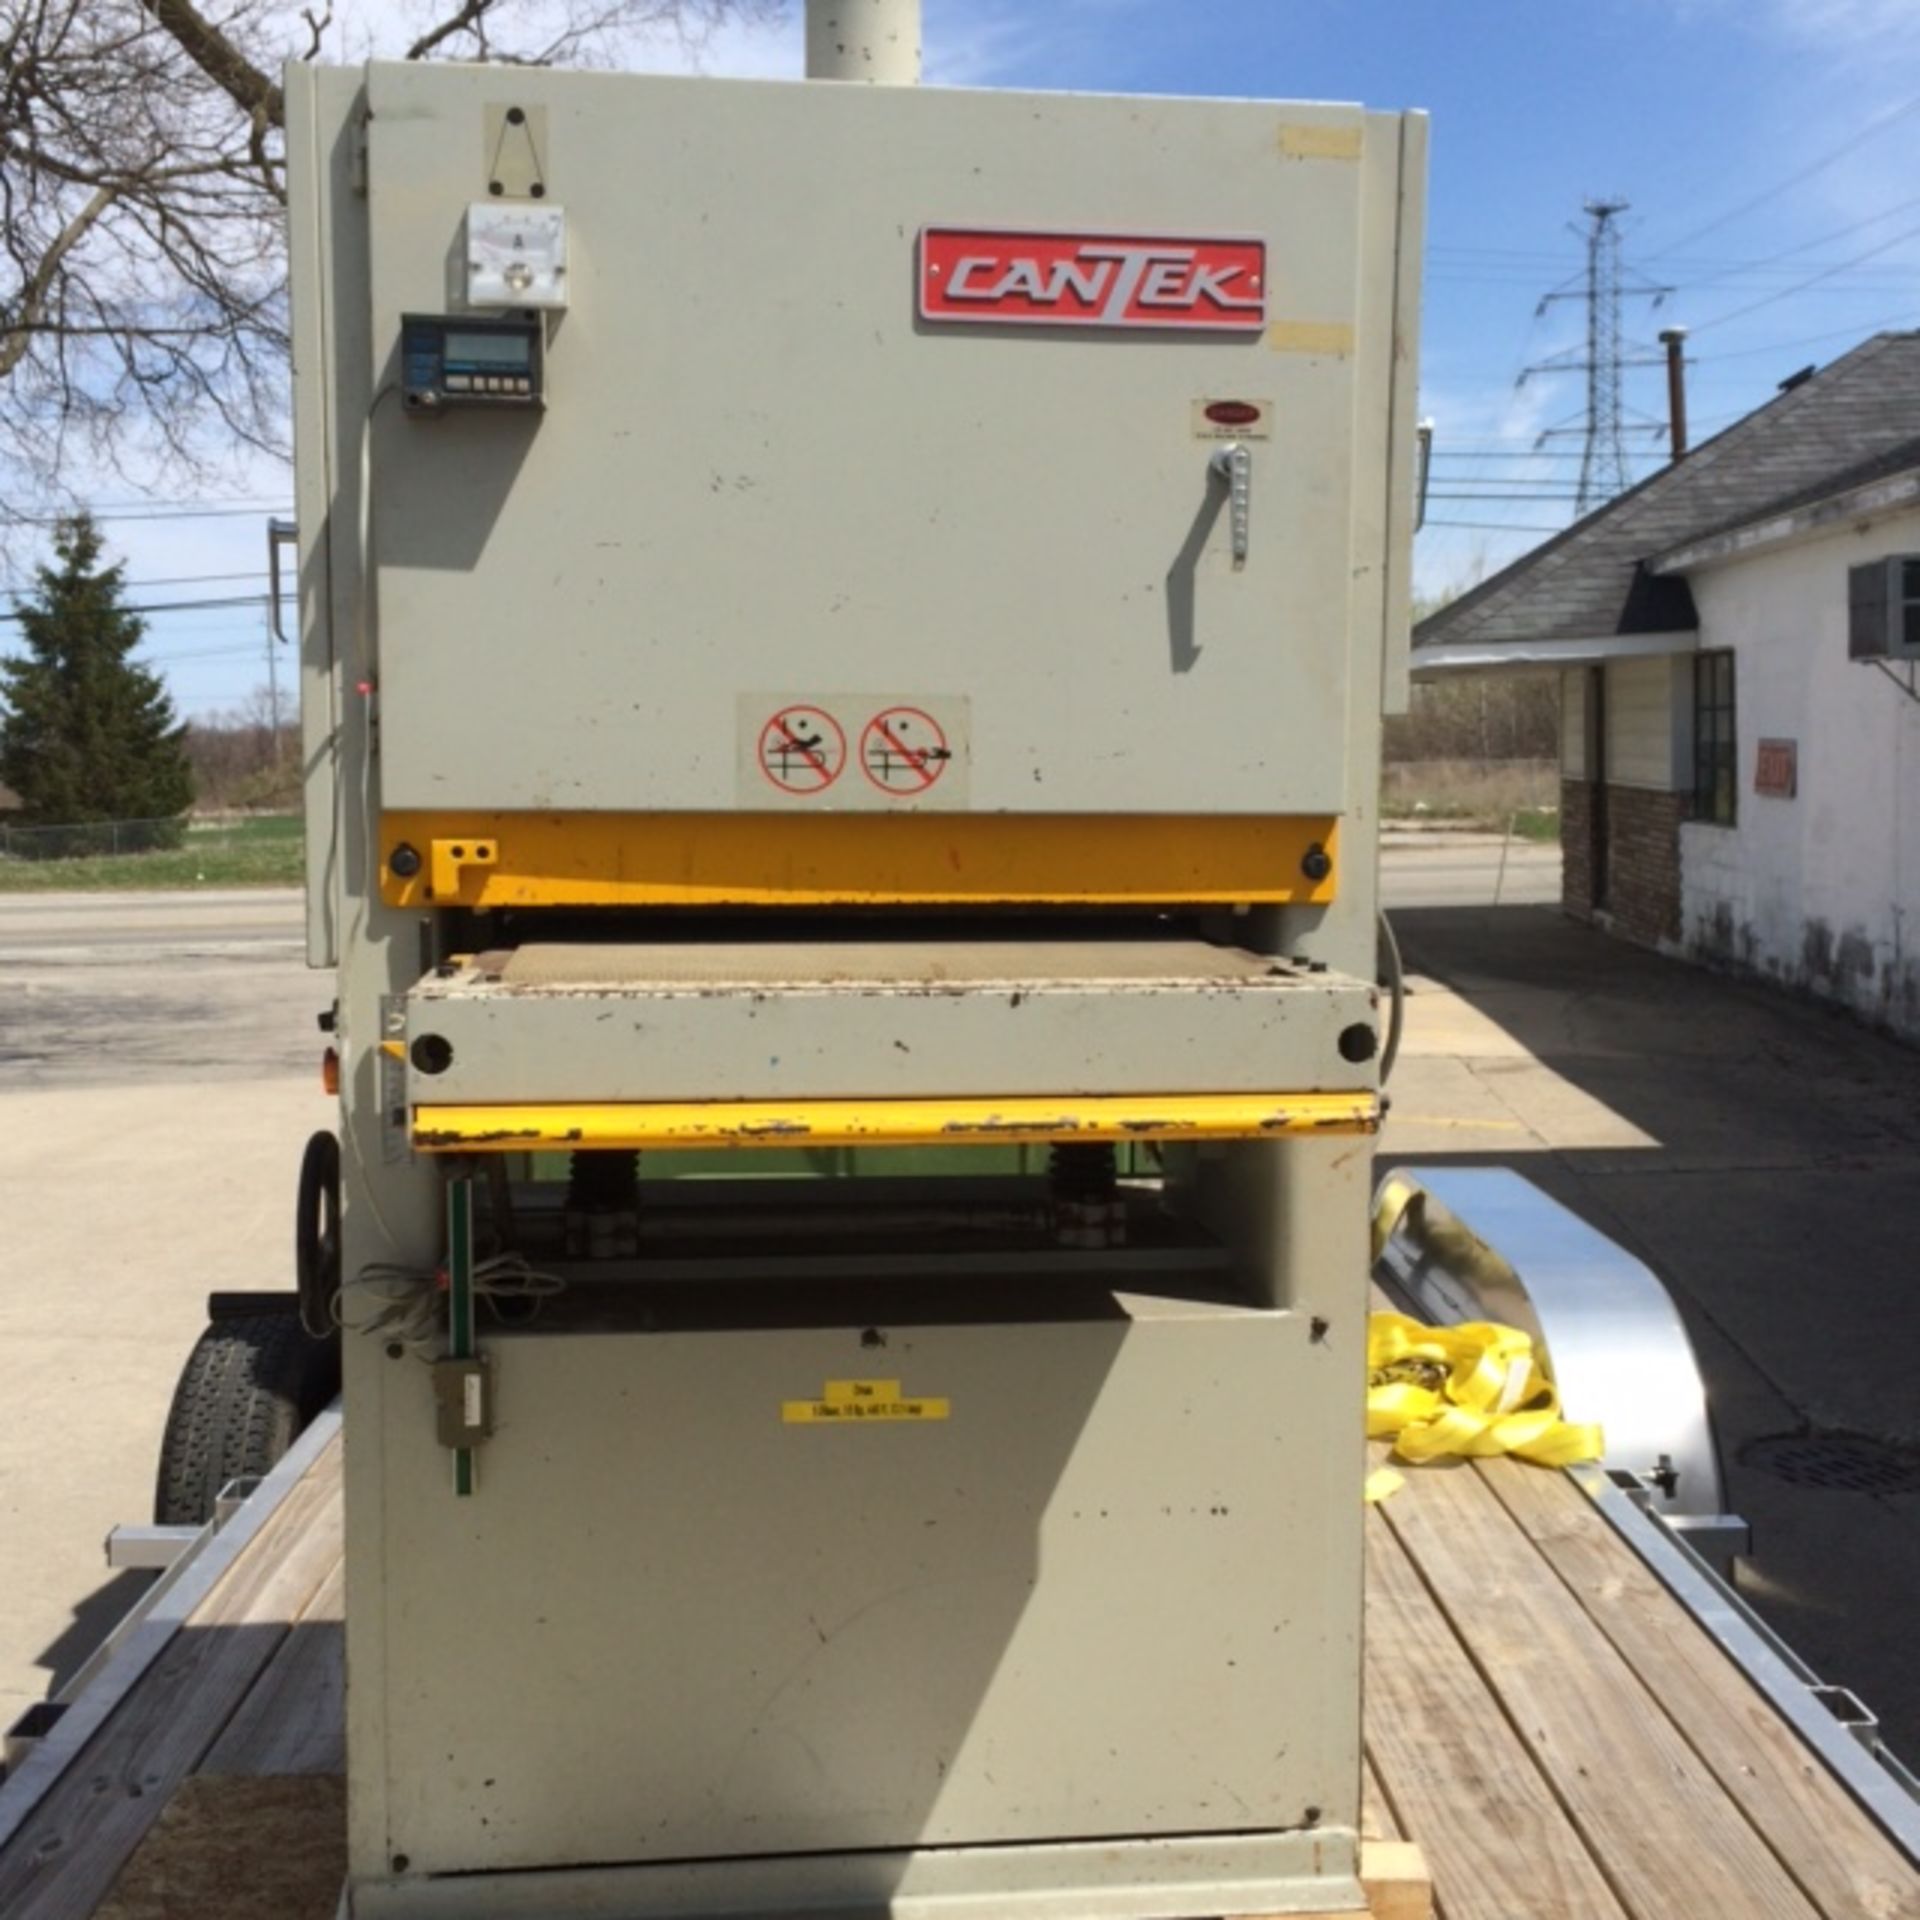 CANTEK INDUSTRIAL DRUM SANDER MODEL #A2560 3 PHASE 10 HP, LOCATION MI, BUYER TO LOAD & SHIP - Image 2 of 2